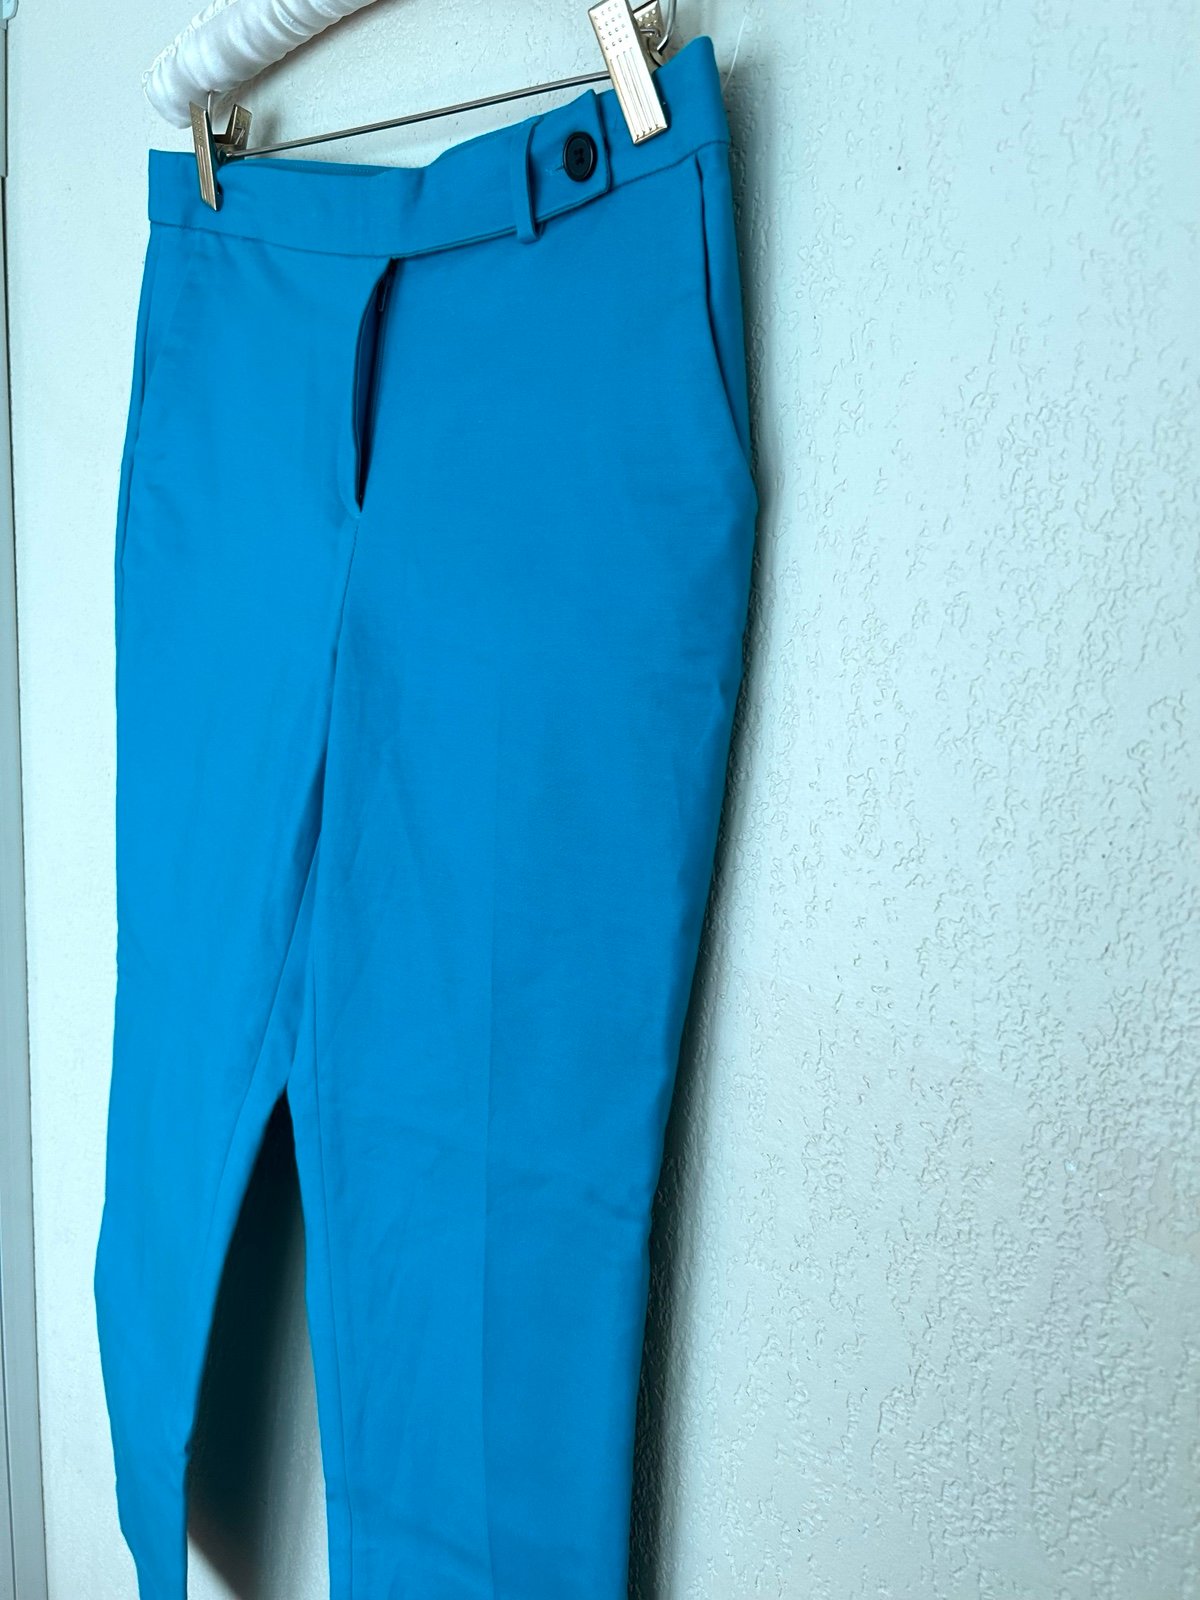 Wholesale price Pure Brand/Blue Pants/Size 4 MBX6Ac50g Great